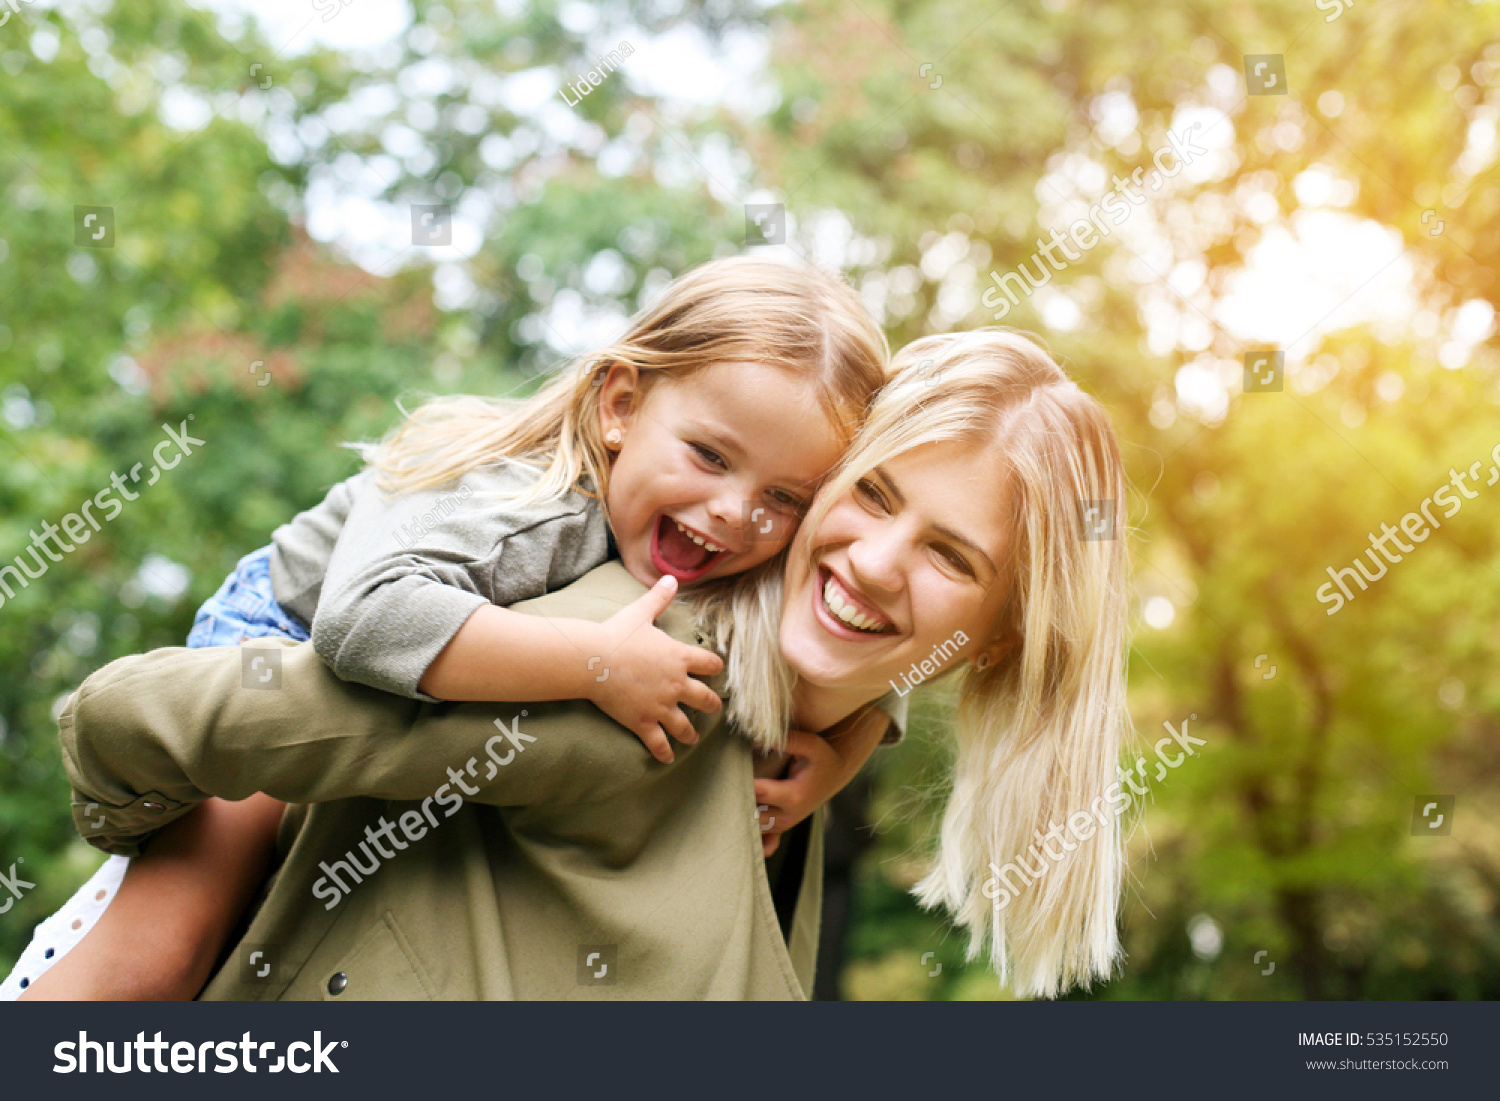 Cute young daughter on a piggy back ride with her mother. #535152550